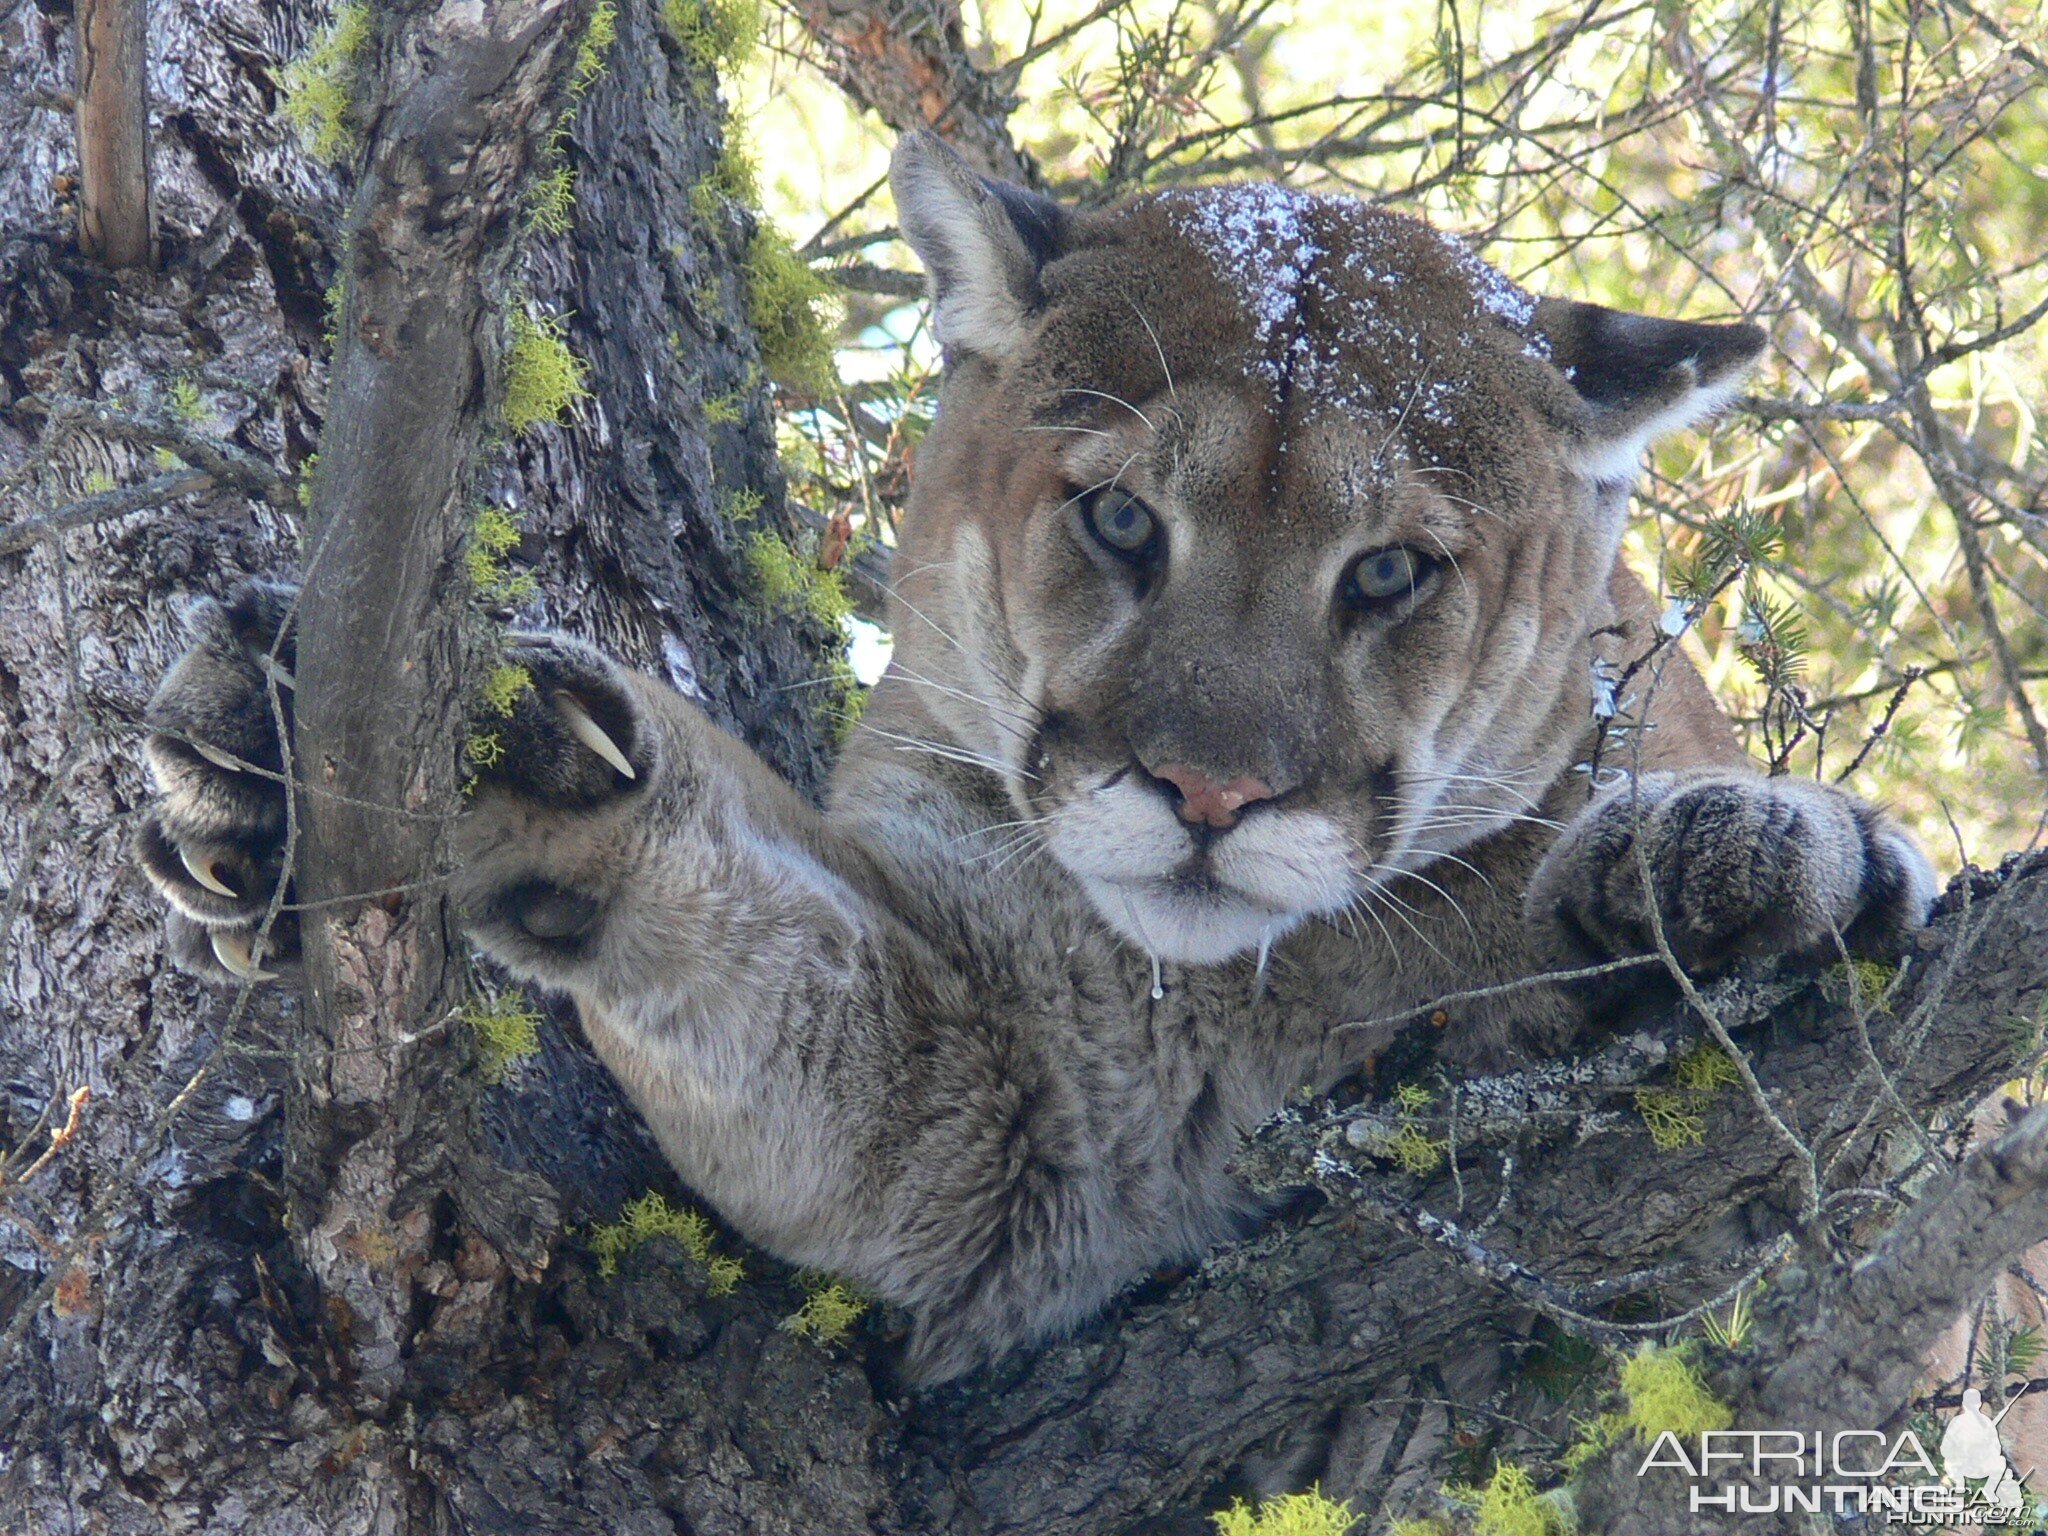 Typical mountain lion stare. Looks like a harmful pussy cat does he not?